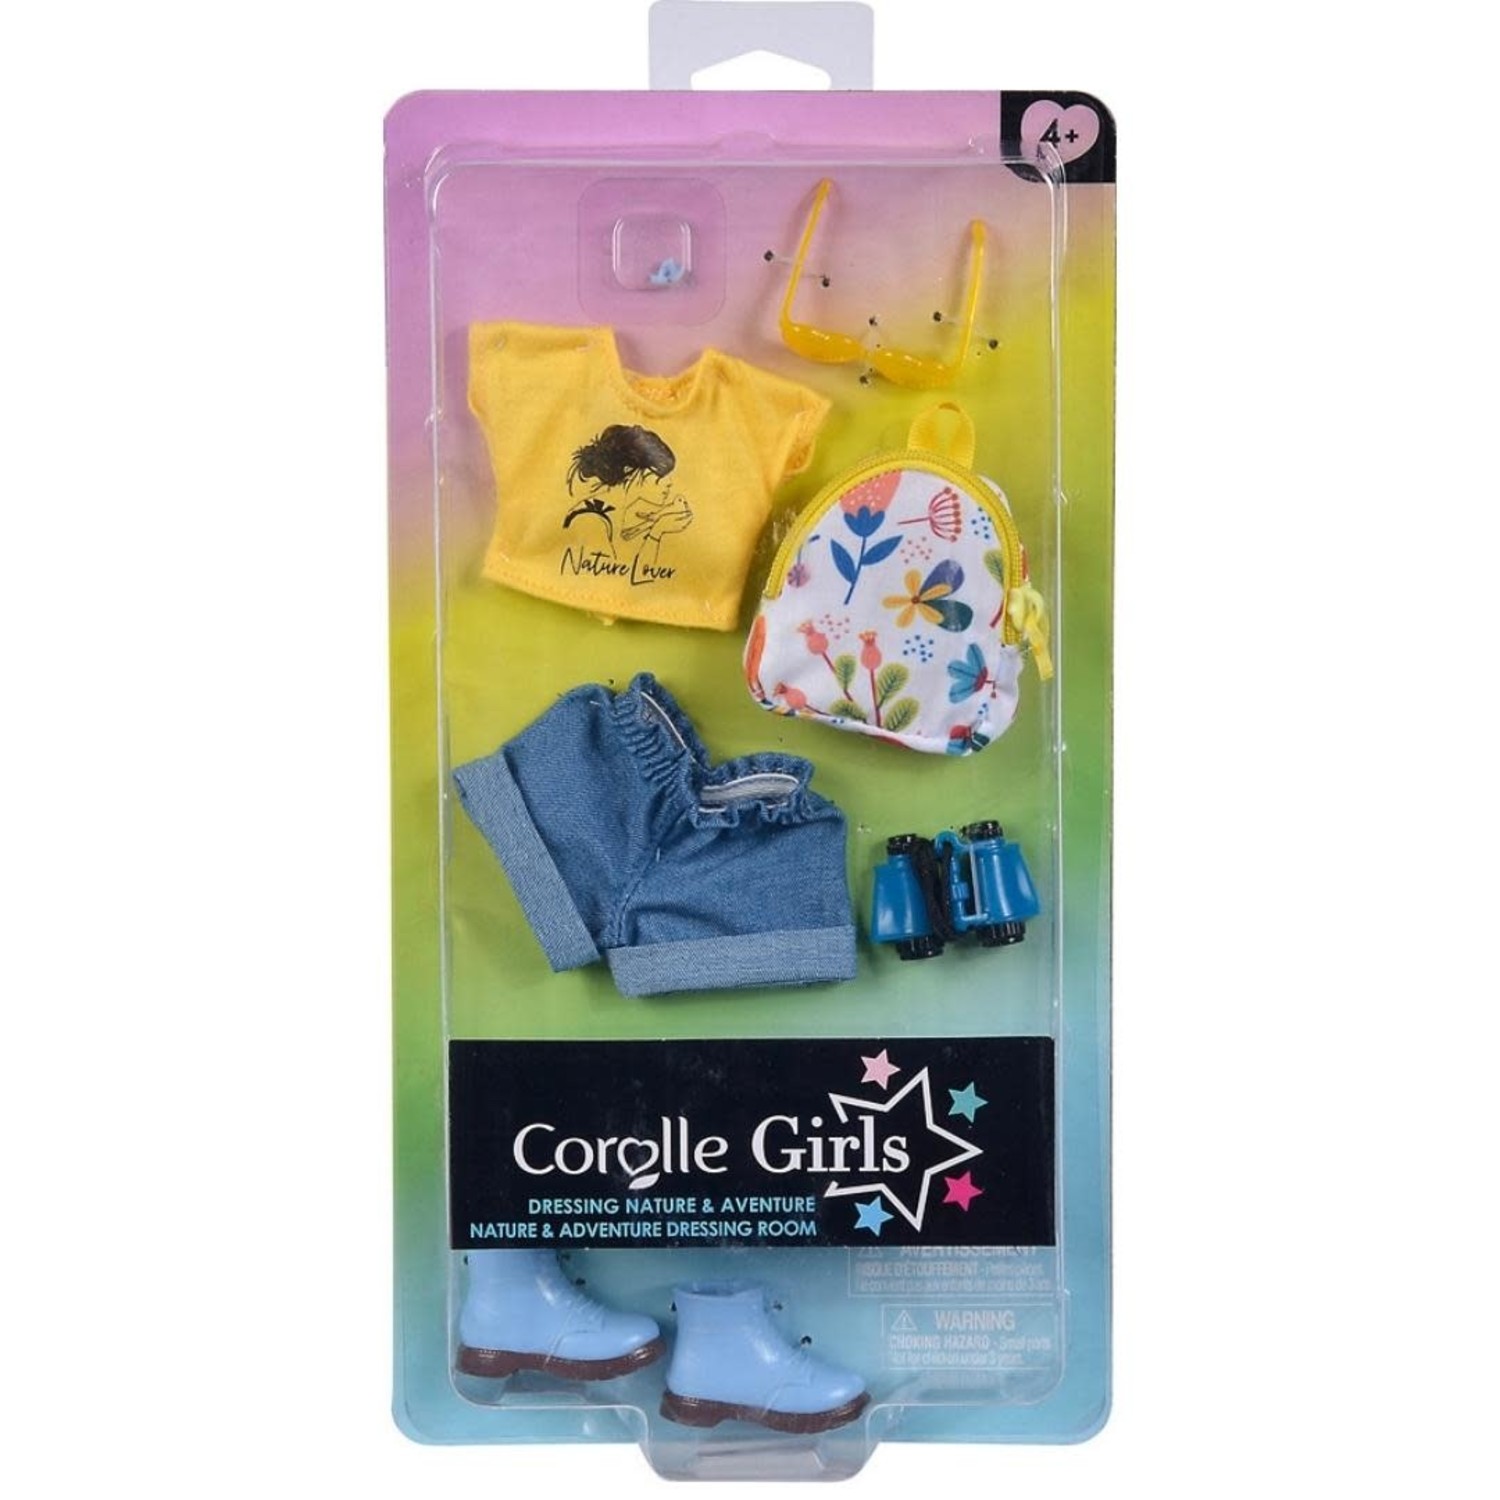 Nature Adventure Dressing Room Set Corolle Girls - Mudpuddles Toys and Books